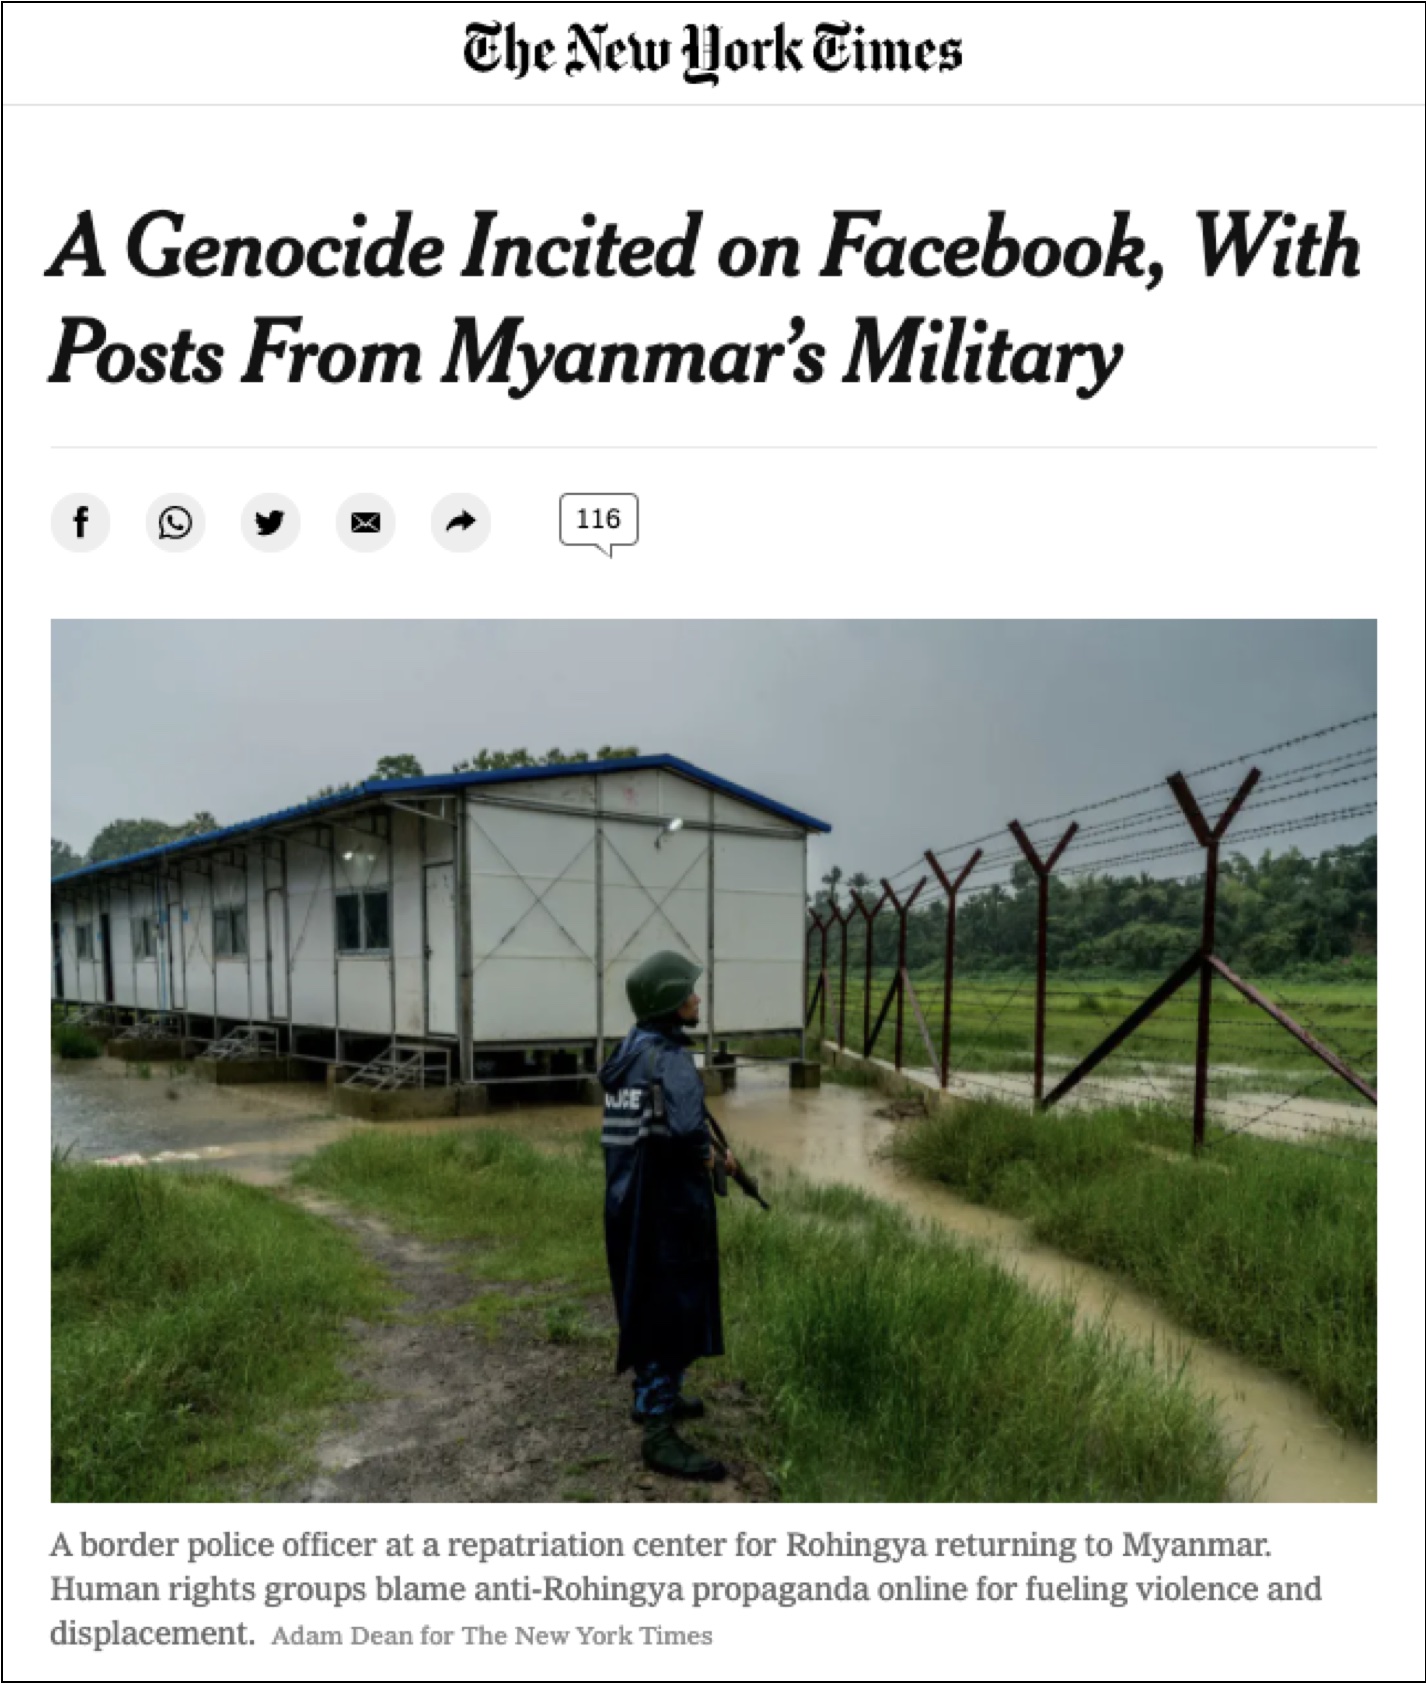 Headline of the article published in The New York Times regarding the genocide of Rohingya people in Myanmar.